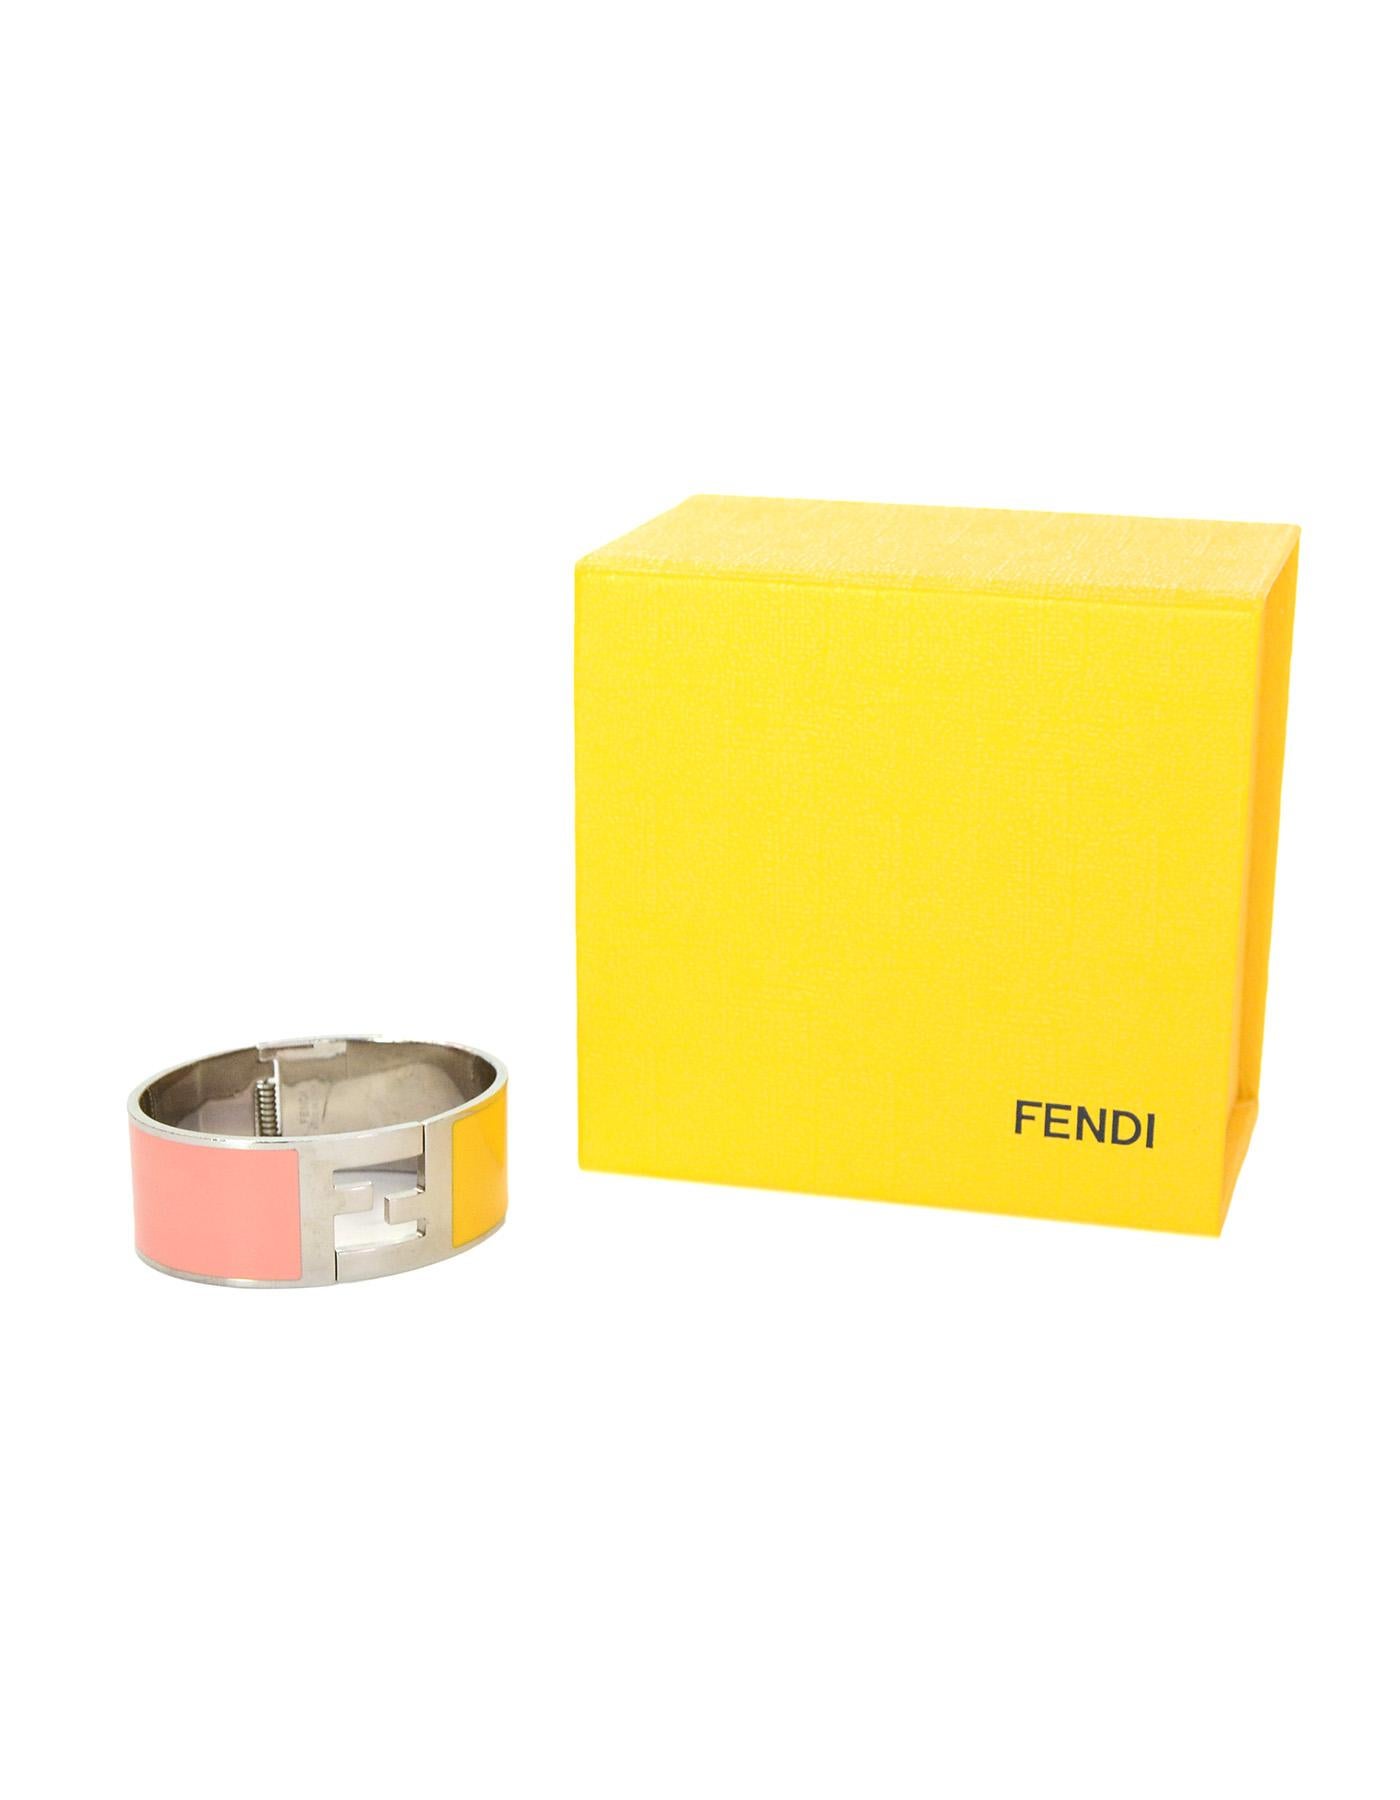 Fendi Pink & Yellow Clic Clac Silvertone Bangle Bracelet With Box

Made In:  Italy
Color: Pink, yellow, silvertone
Materials:  Enamel and metal
Hallmarks: On interior back: 